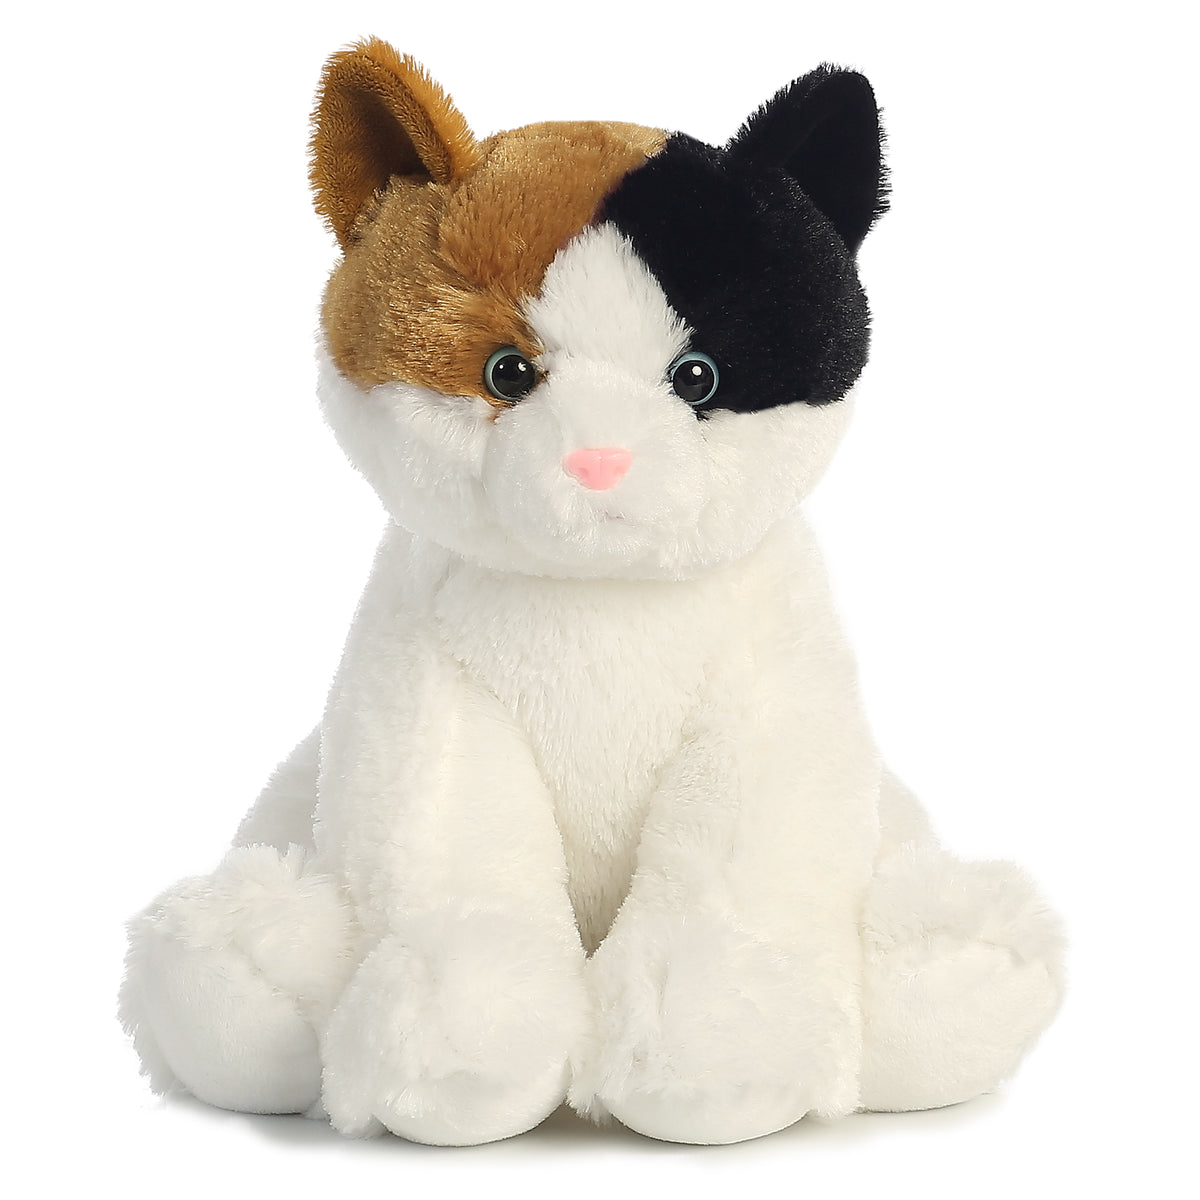 Aurora stuffed animal Esmeralda the Calico Cat Plush with a tri-color coat, bright eyes, and a pink nose.